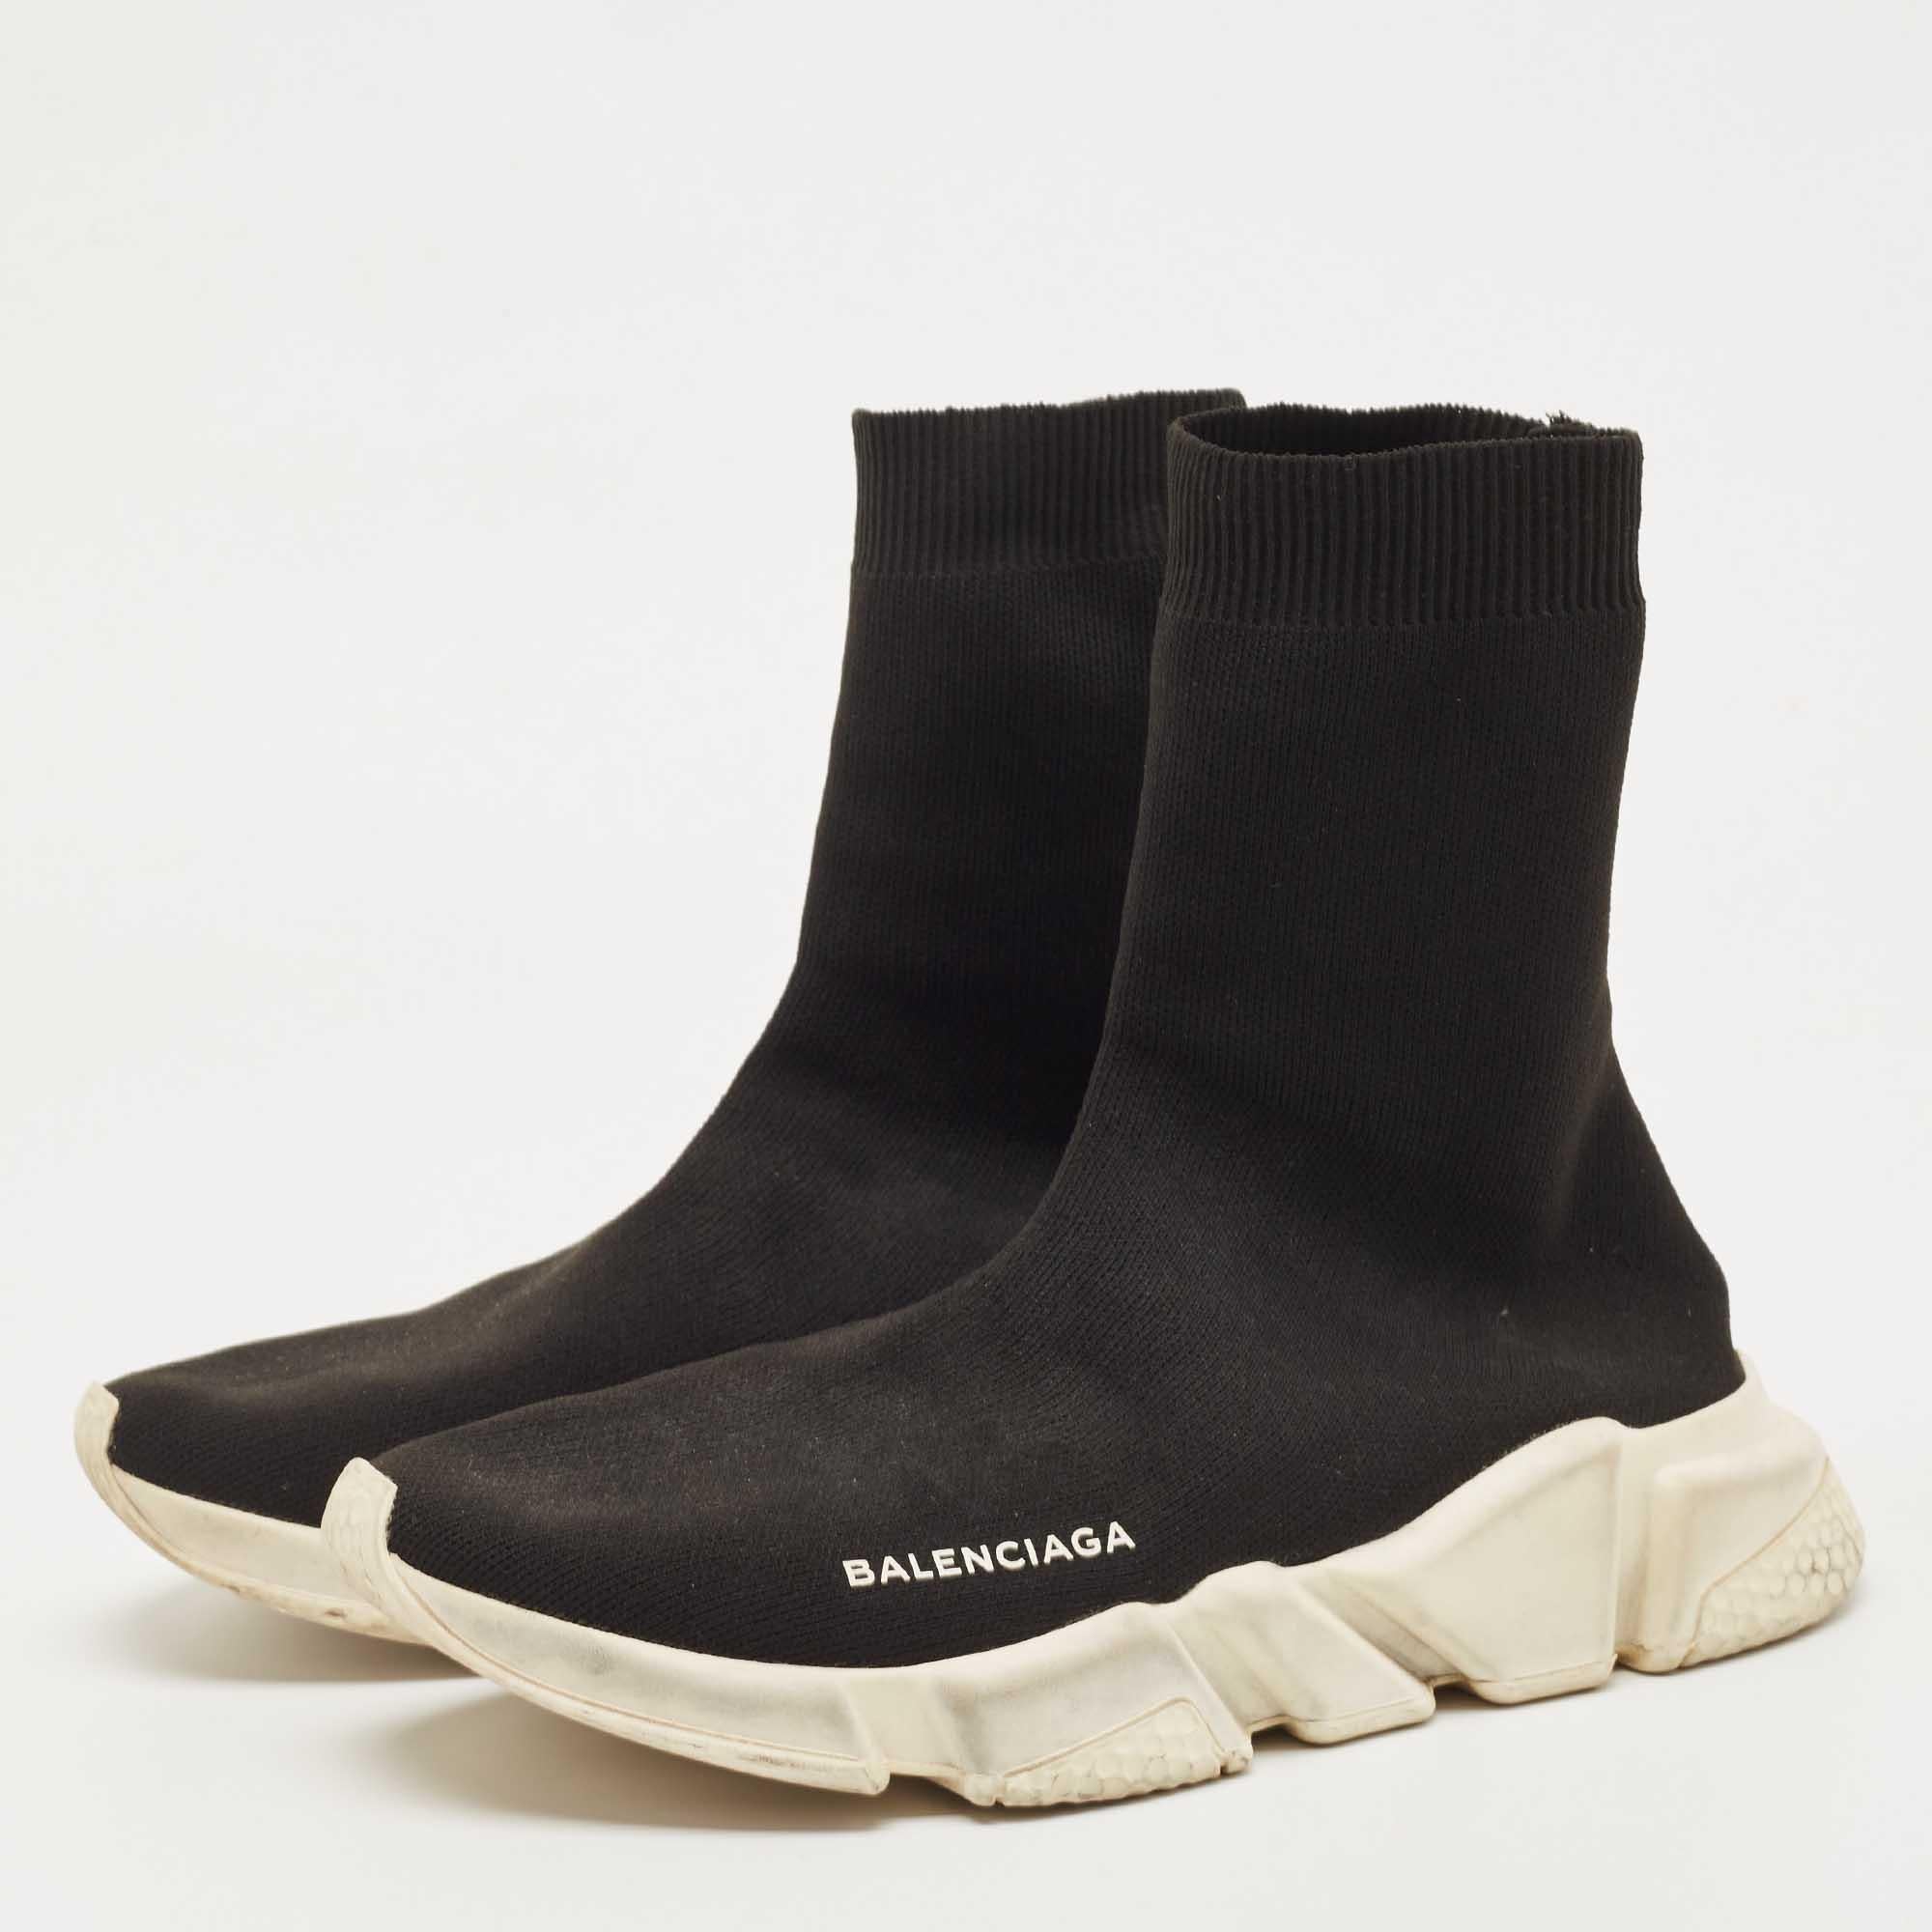 Celebrating the fusion of sports and luxury fashion, these Balenciaga Speed Trainer sneakers are absolutely worth the splurge. They are laceless and so well-crafted with breathable knit fabric in a sock style. The sneakers are also designed with